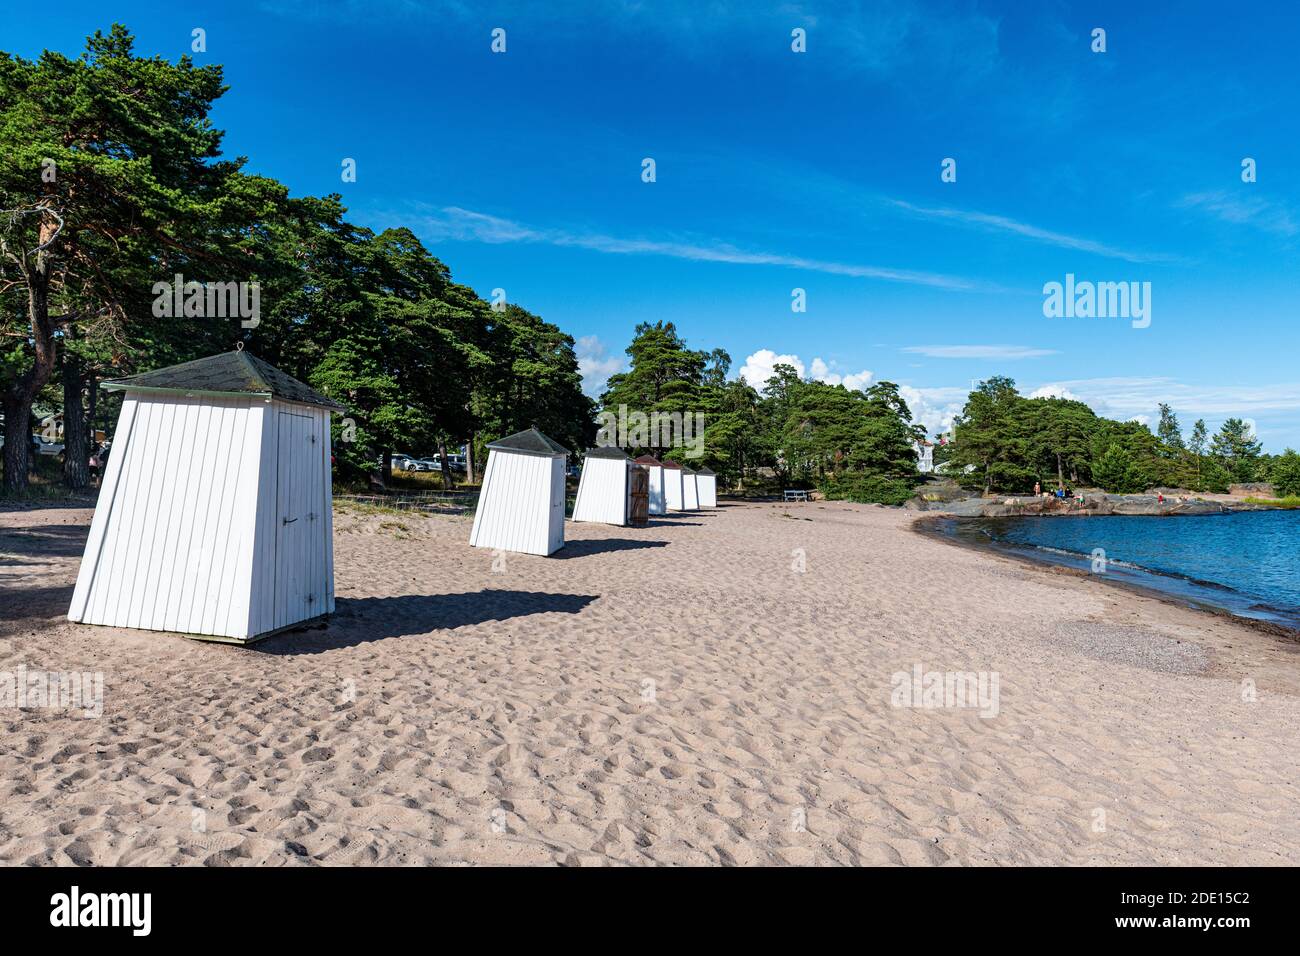 Beach huts on a deserted beach, Hanko, southern Finland, Europe Stock Photo